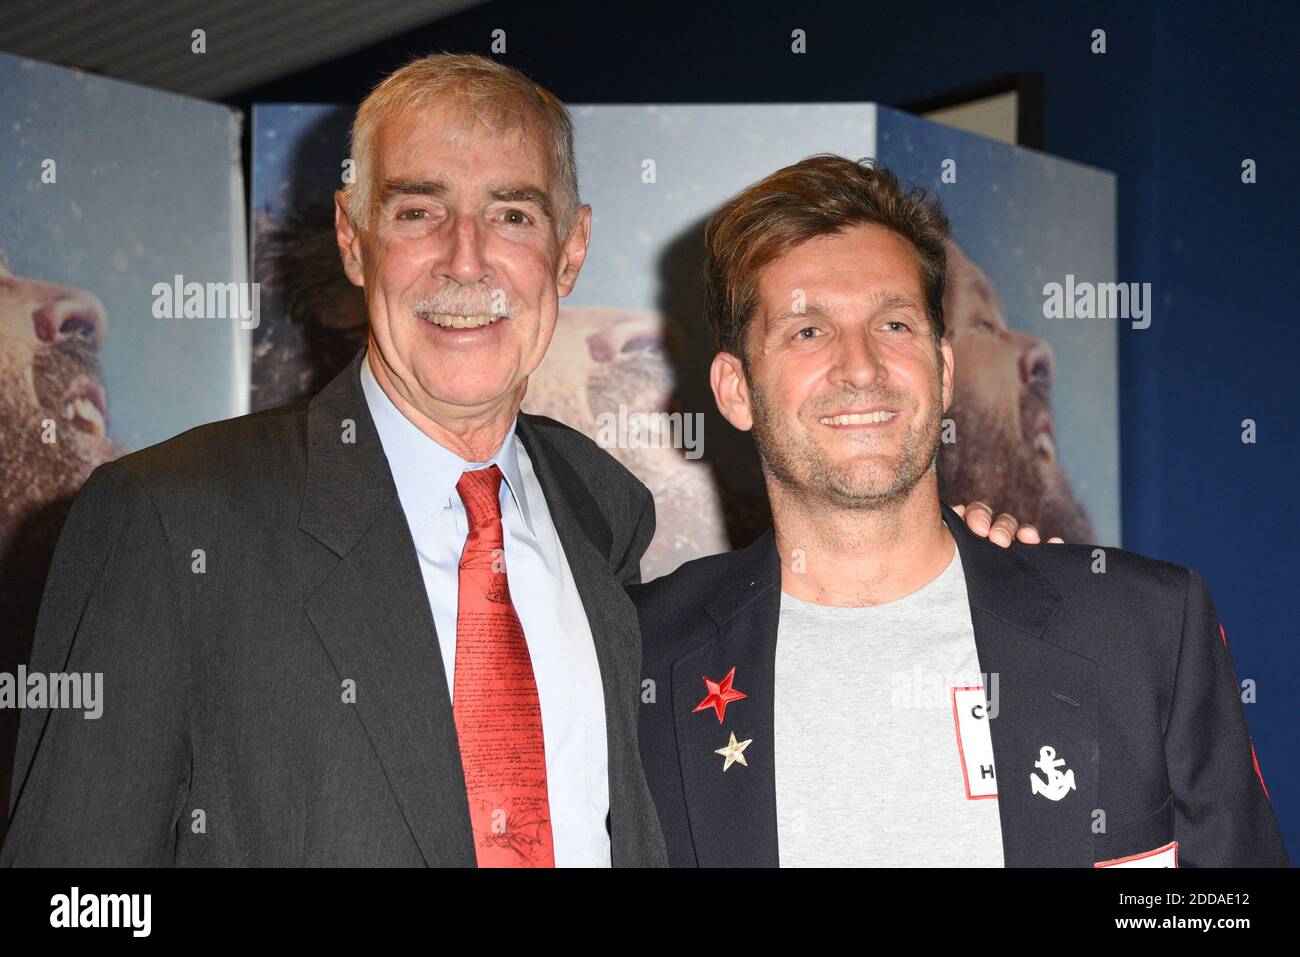 American skipper Rich Wilson posing with French skipper Eric Bellion during  the premiere of 'Comme un seul homme' at UGC Normandie cinema, in Paris,  France, on September 20th, 2018. Photo by Mireille